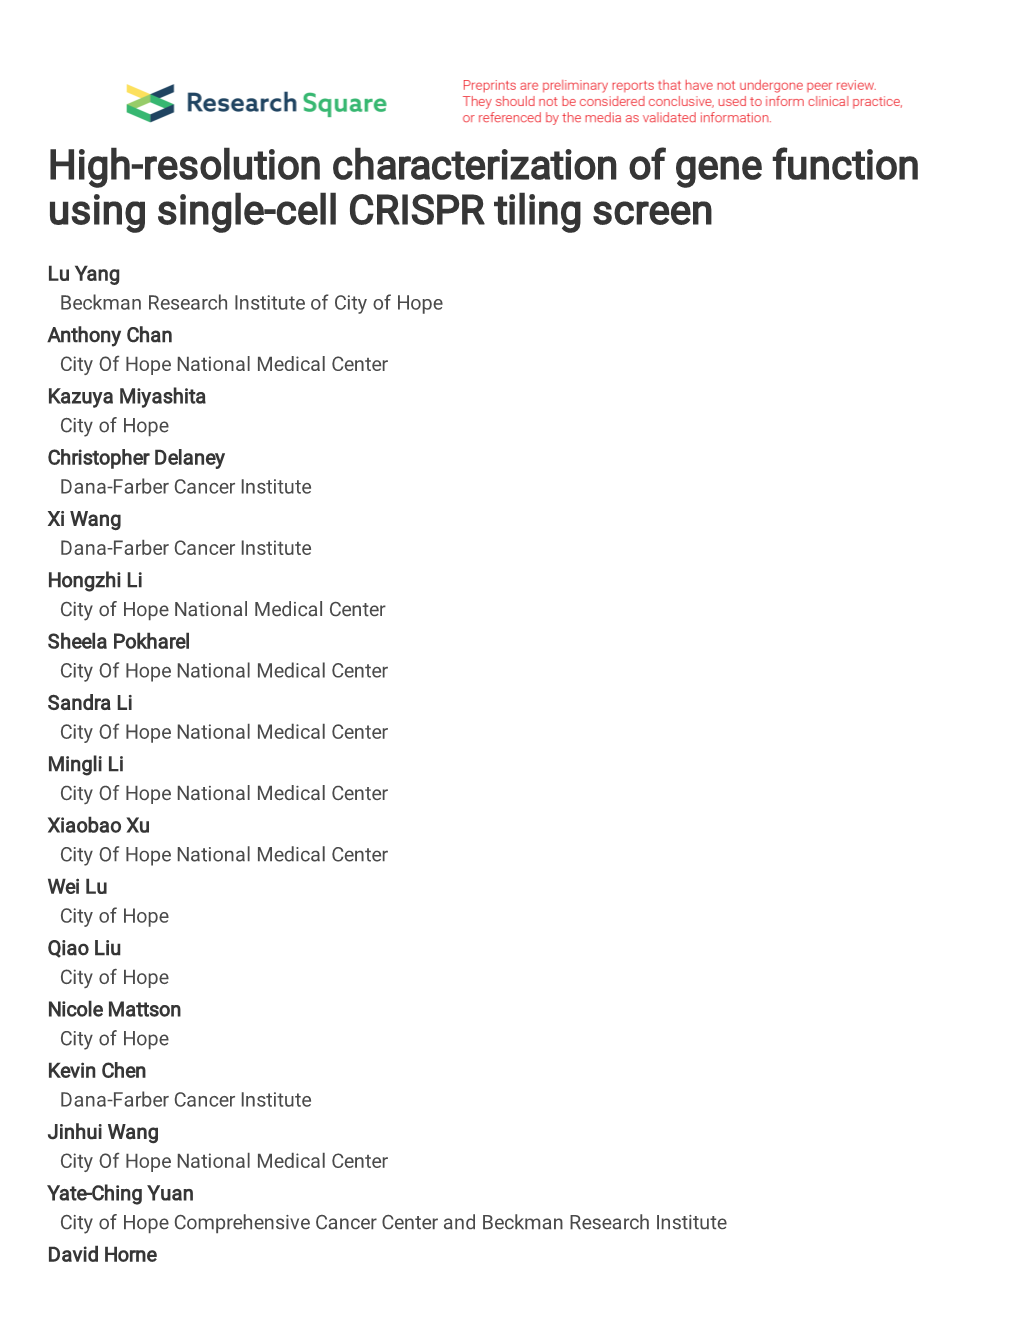 High-Resolution Characterization of Gene Function Using Single-Cell CRISPR Tiling Screen